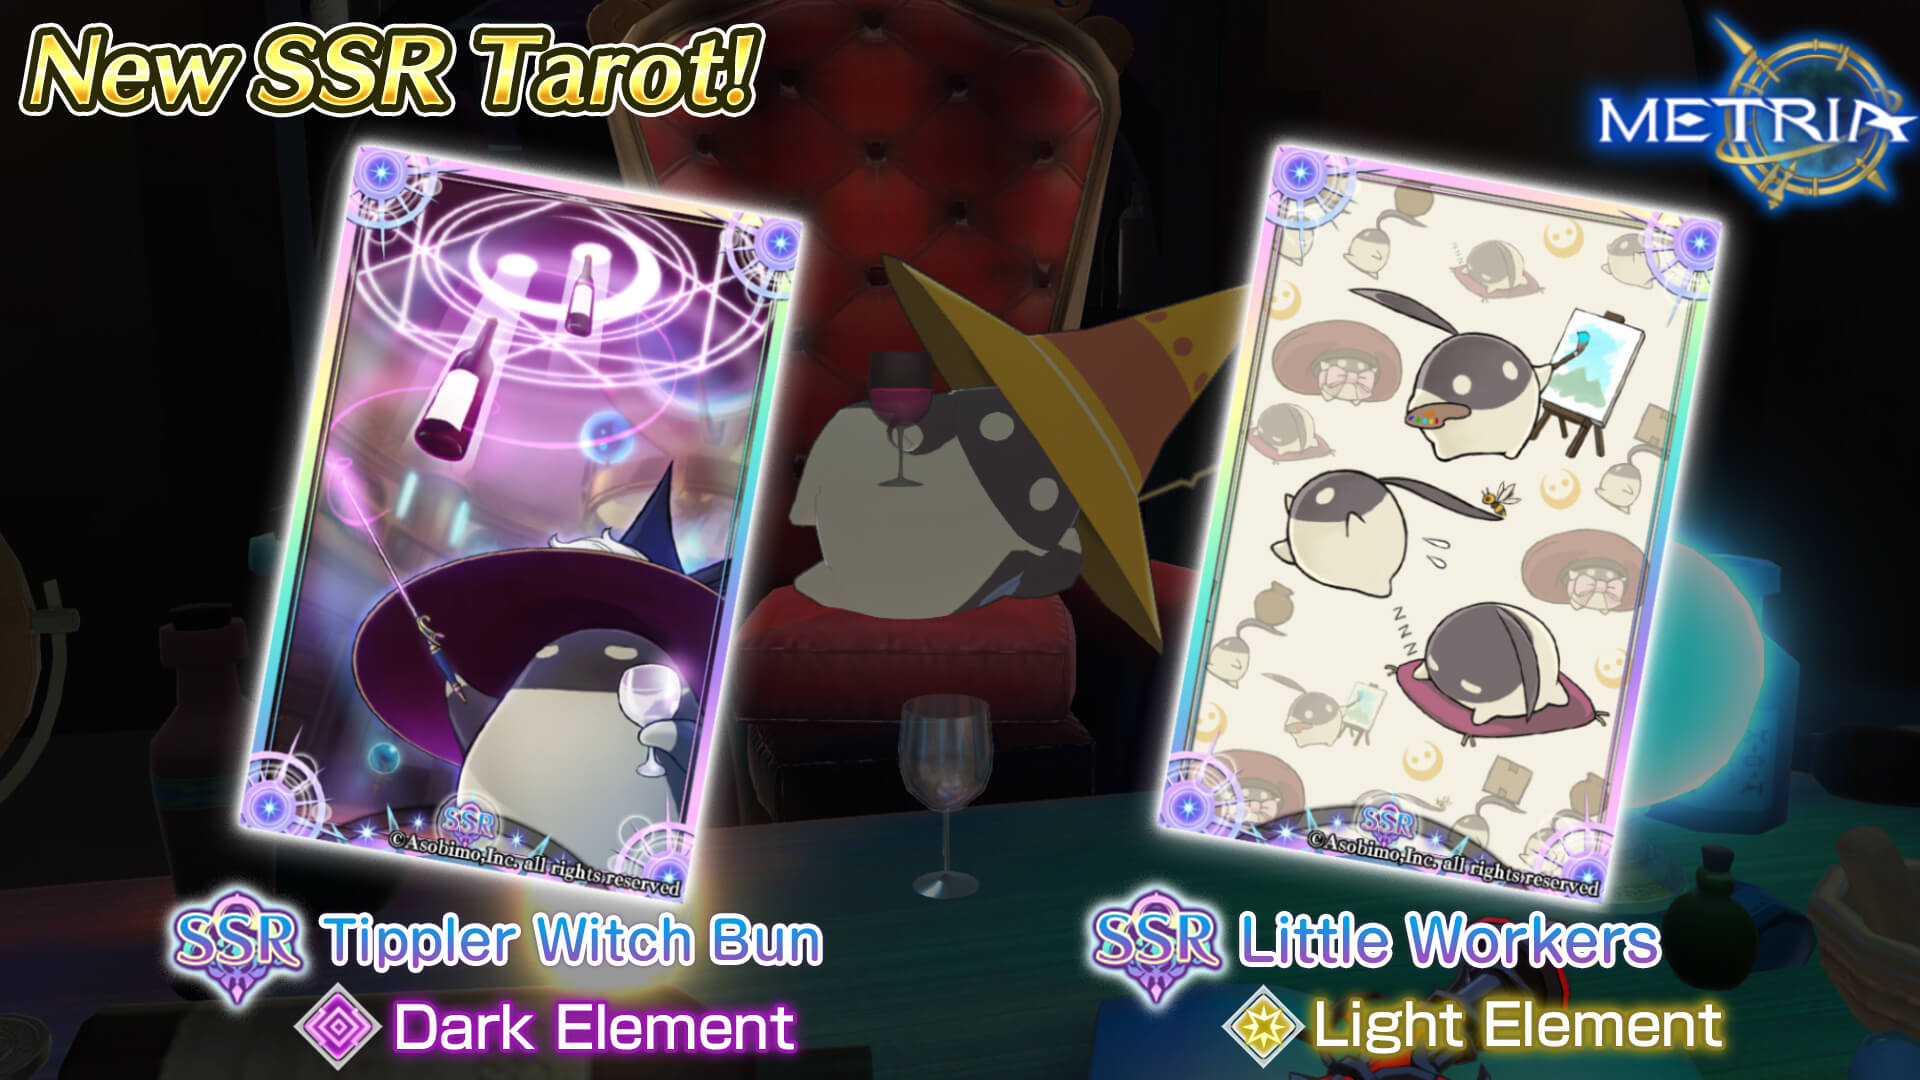 New SSR Tarot: "Tippler Witch Bun" and "Little Workers" Coming Soon!